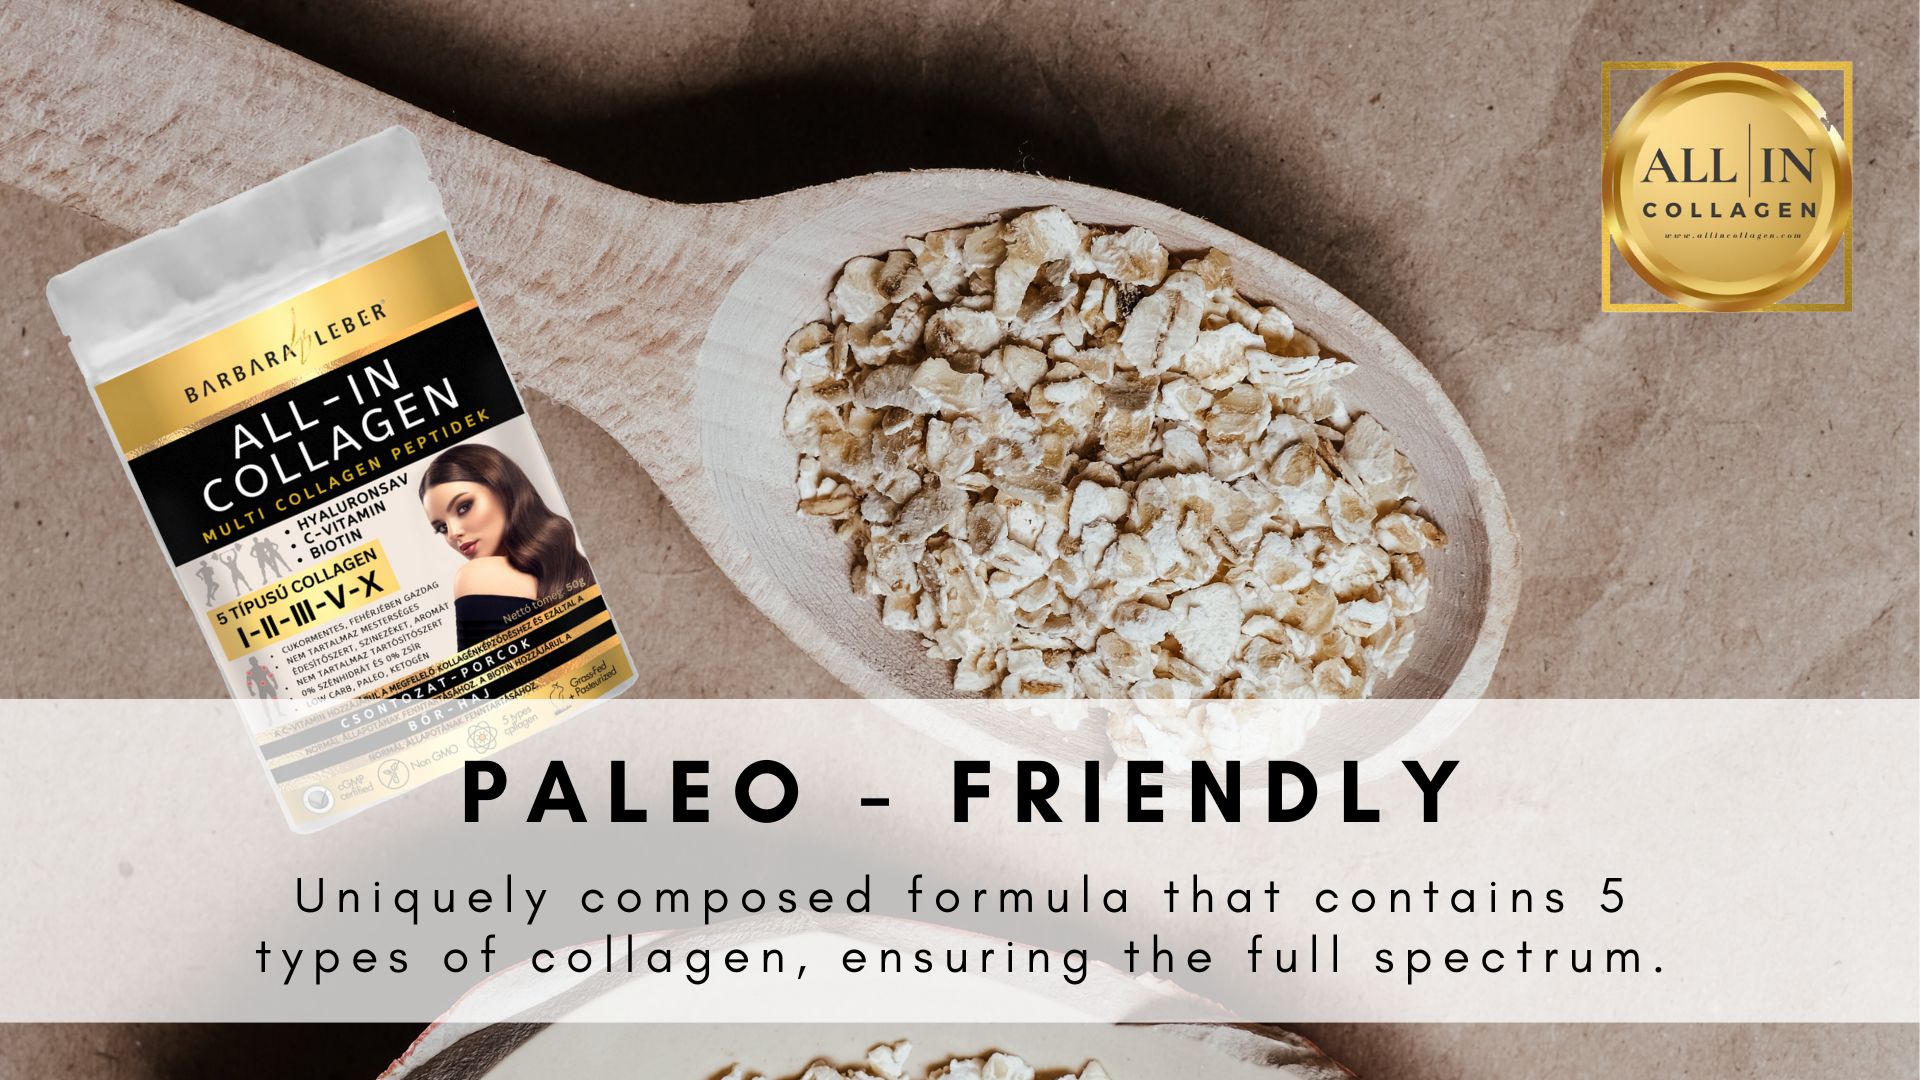 Why is the multi collagen peptides paleo-friendly?